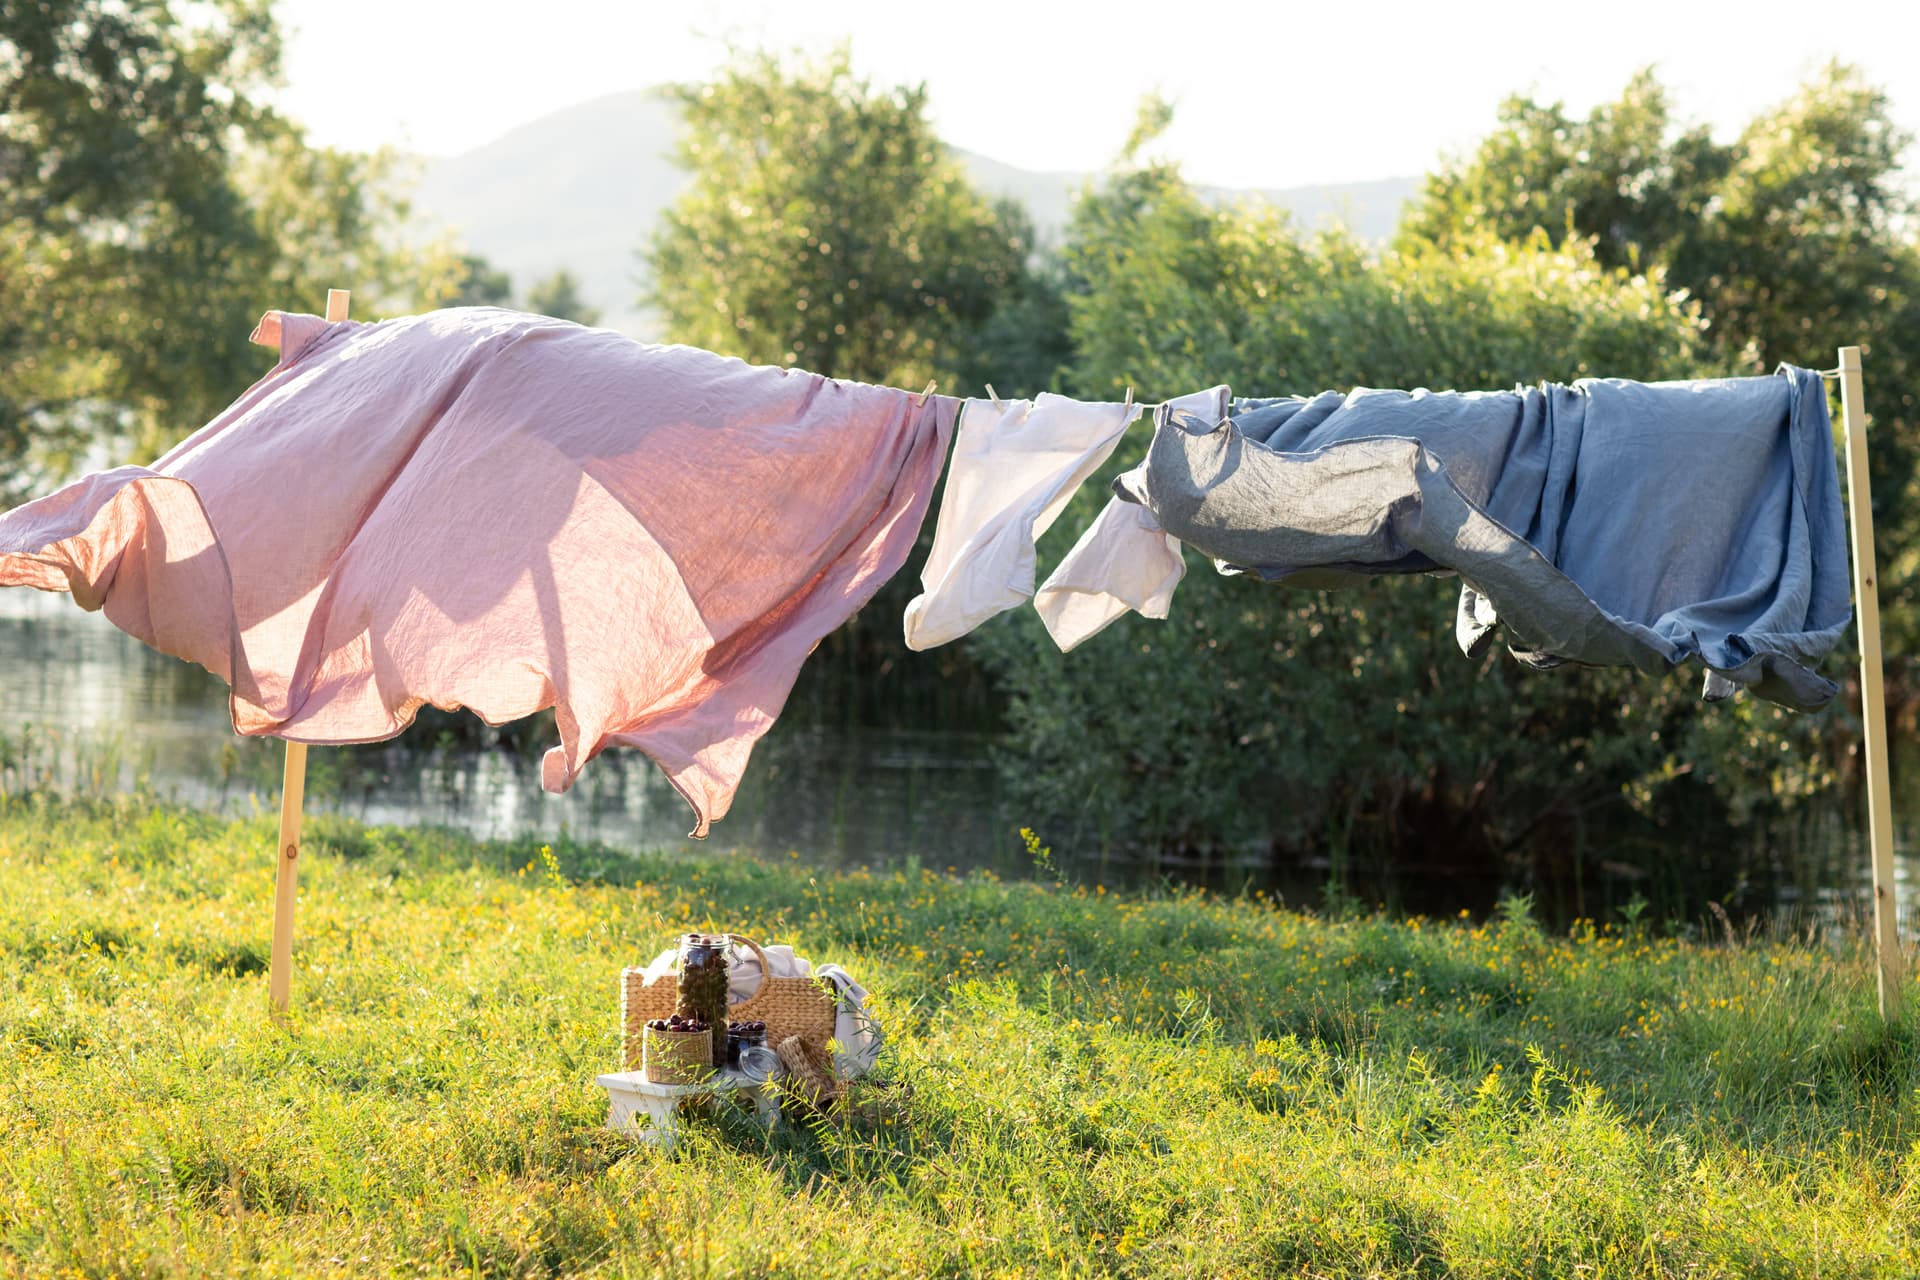 Washing line or rotary dryer? We look at the pros and cons